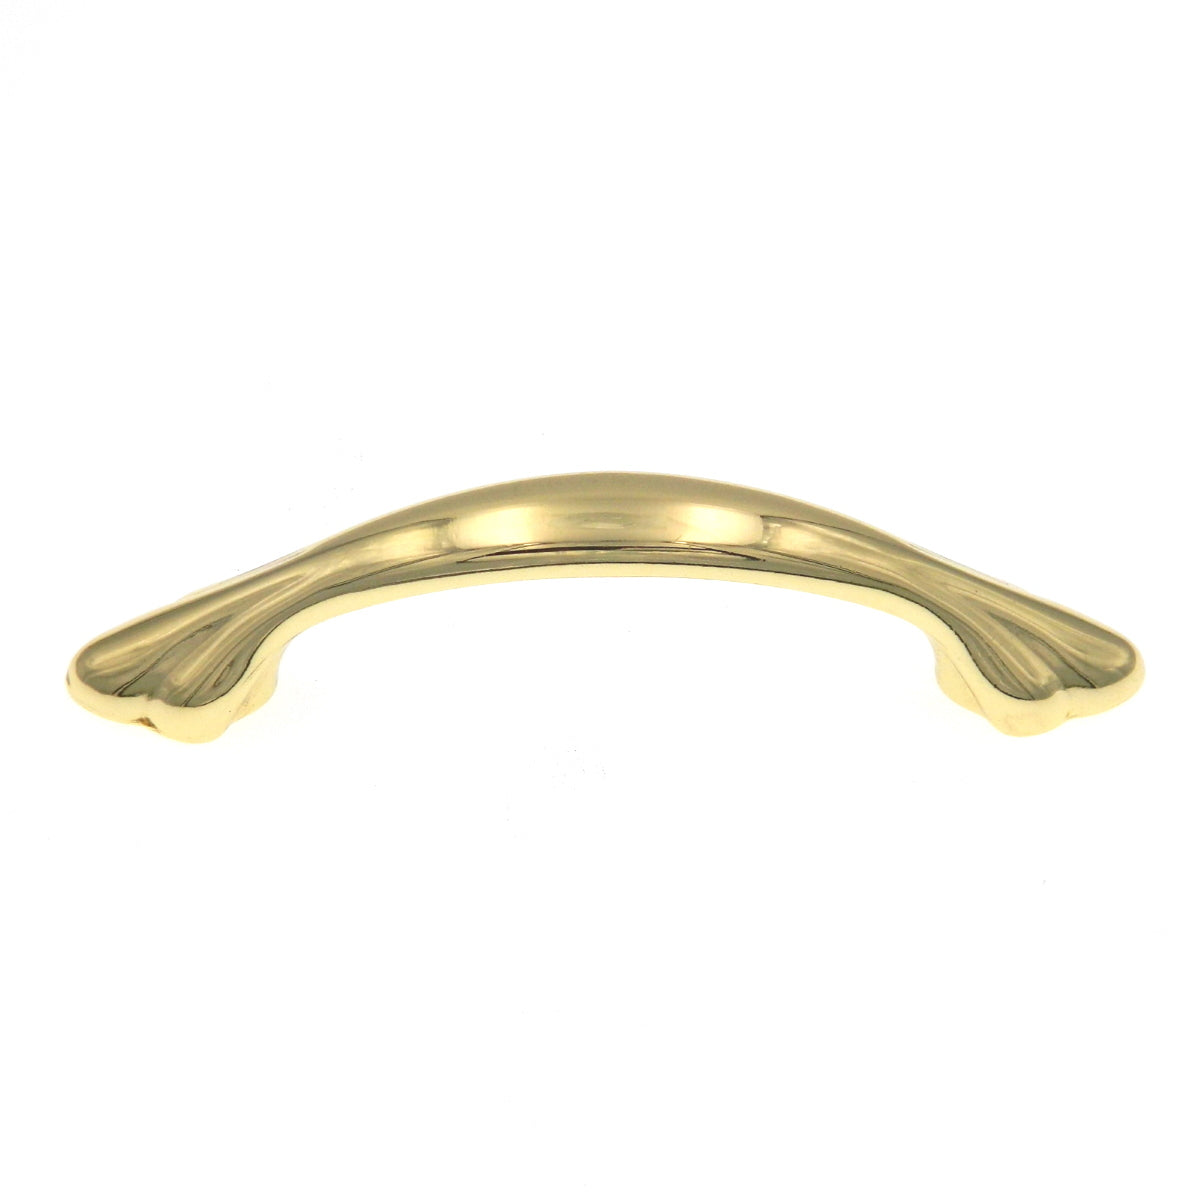 Amerock Radiance BP1394-3 Polished Brass 3"cc Arch Smooth Cabinet Handle Pull